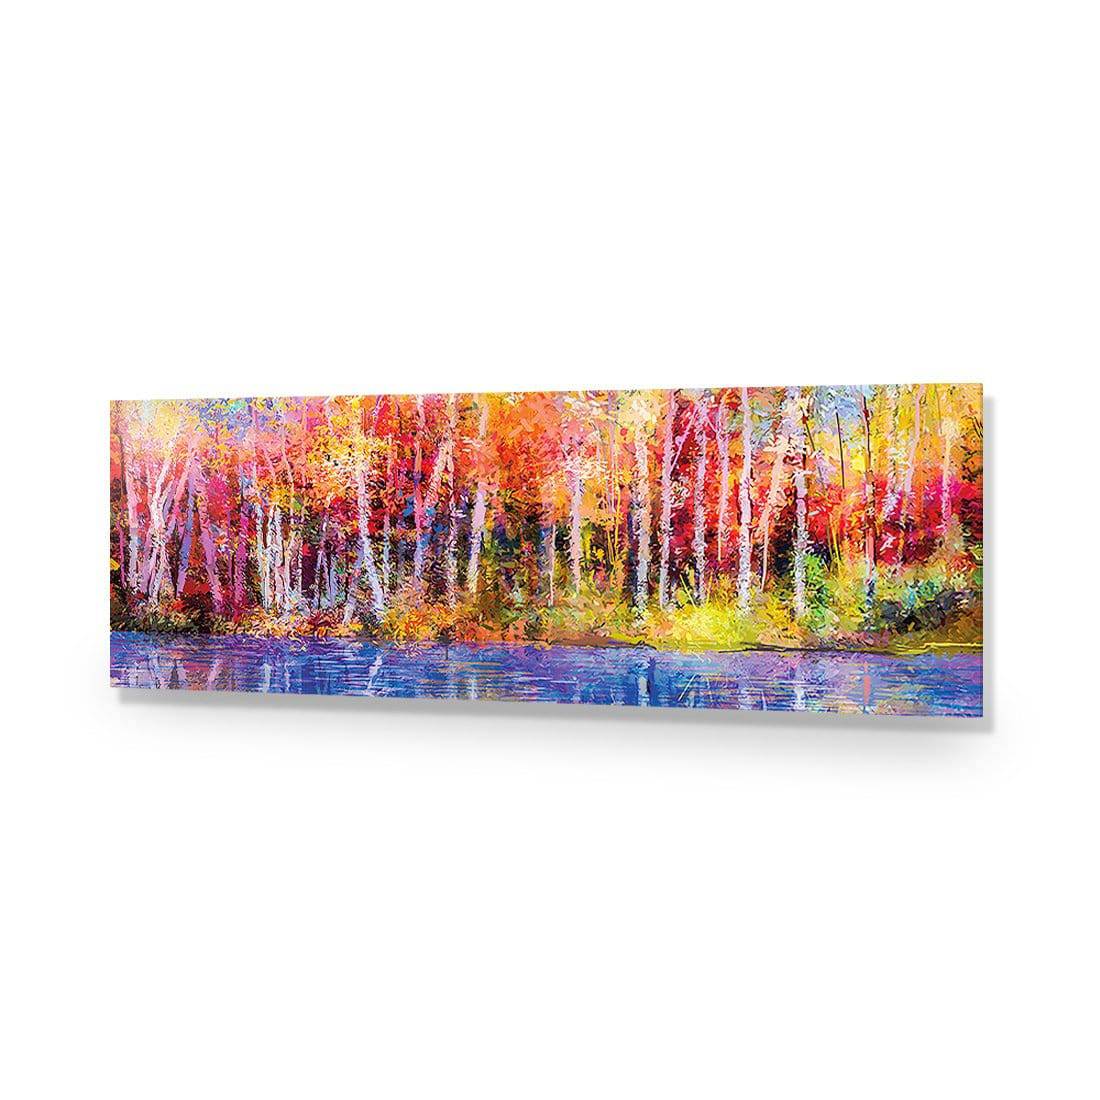 Rainbow Tree Forest, Long-Acrylic-Wall Art Design-Without Border-Acrylic - No Frame-60x20cm-Wall Art Designs